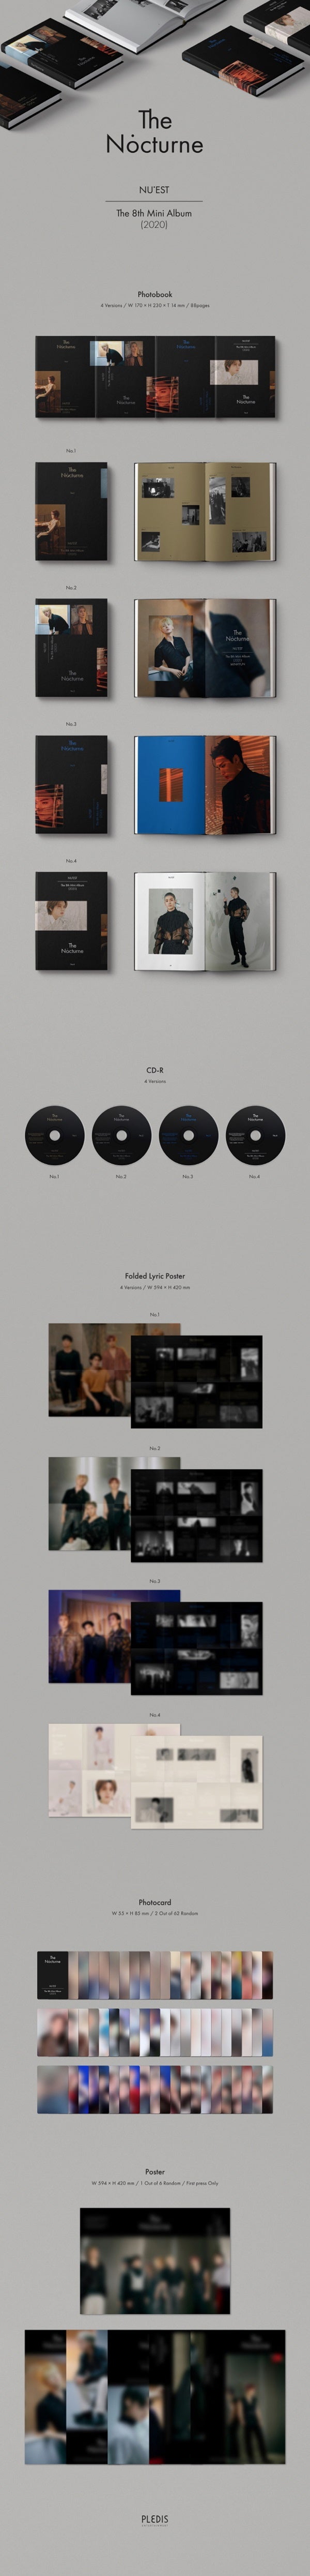 1 CD
1 Lyric Poster 
1 Photo Book (88 pages)
2 Photo Cards